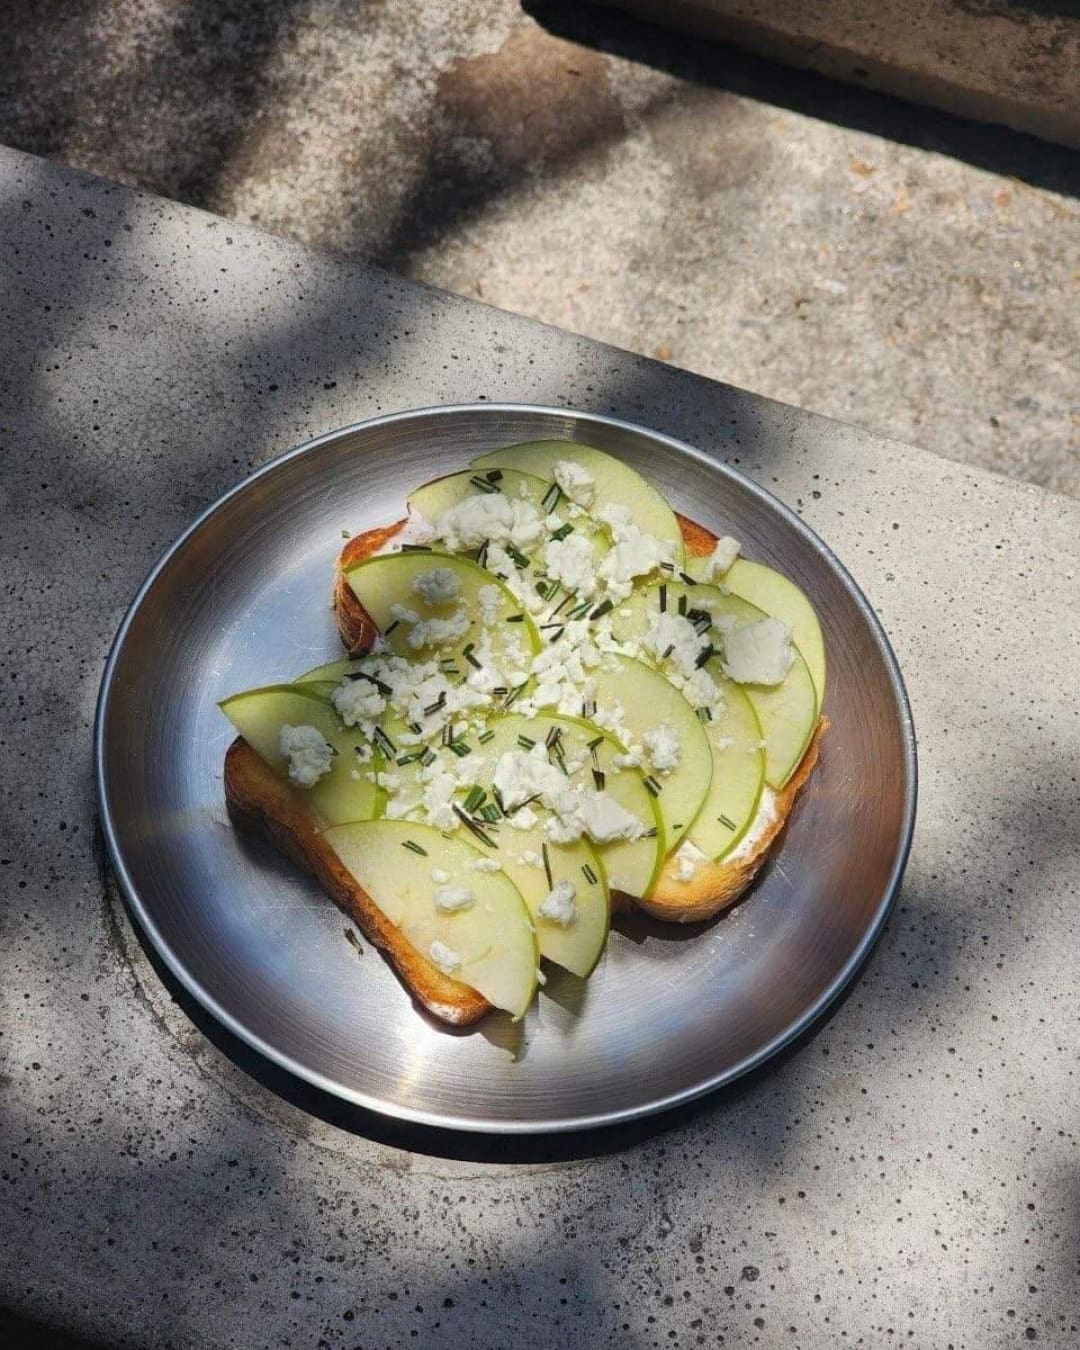 Open toast with slices of apple, served on a zinc table at Karo Coffee Roasters.